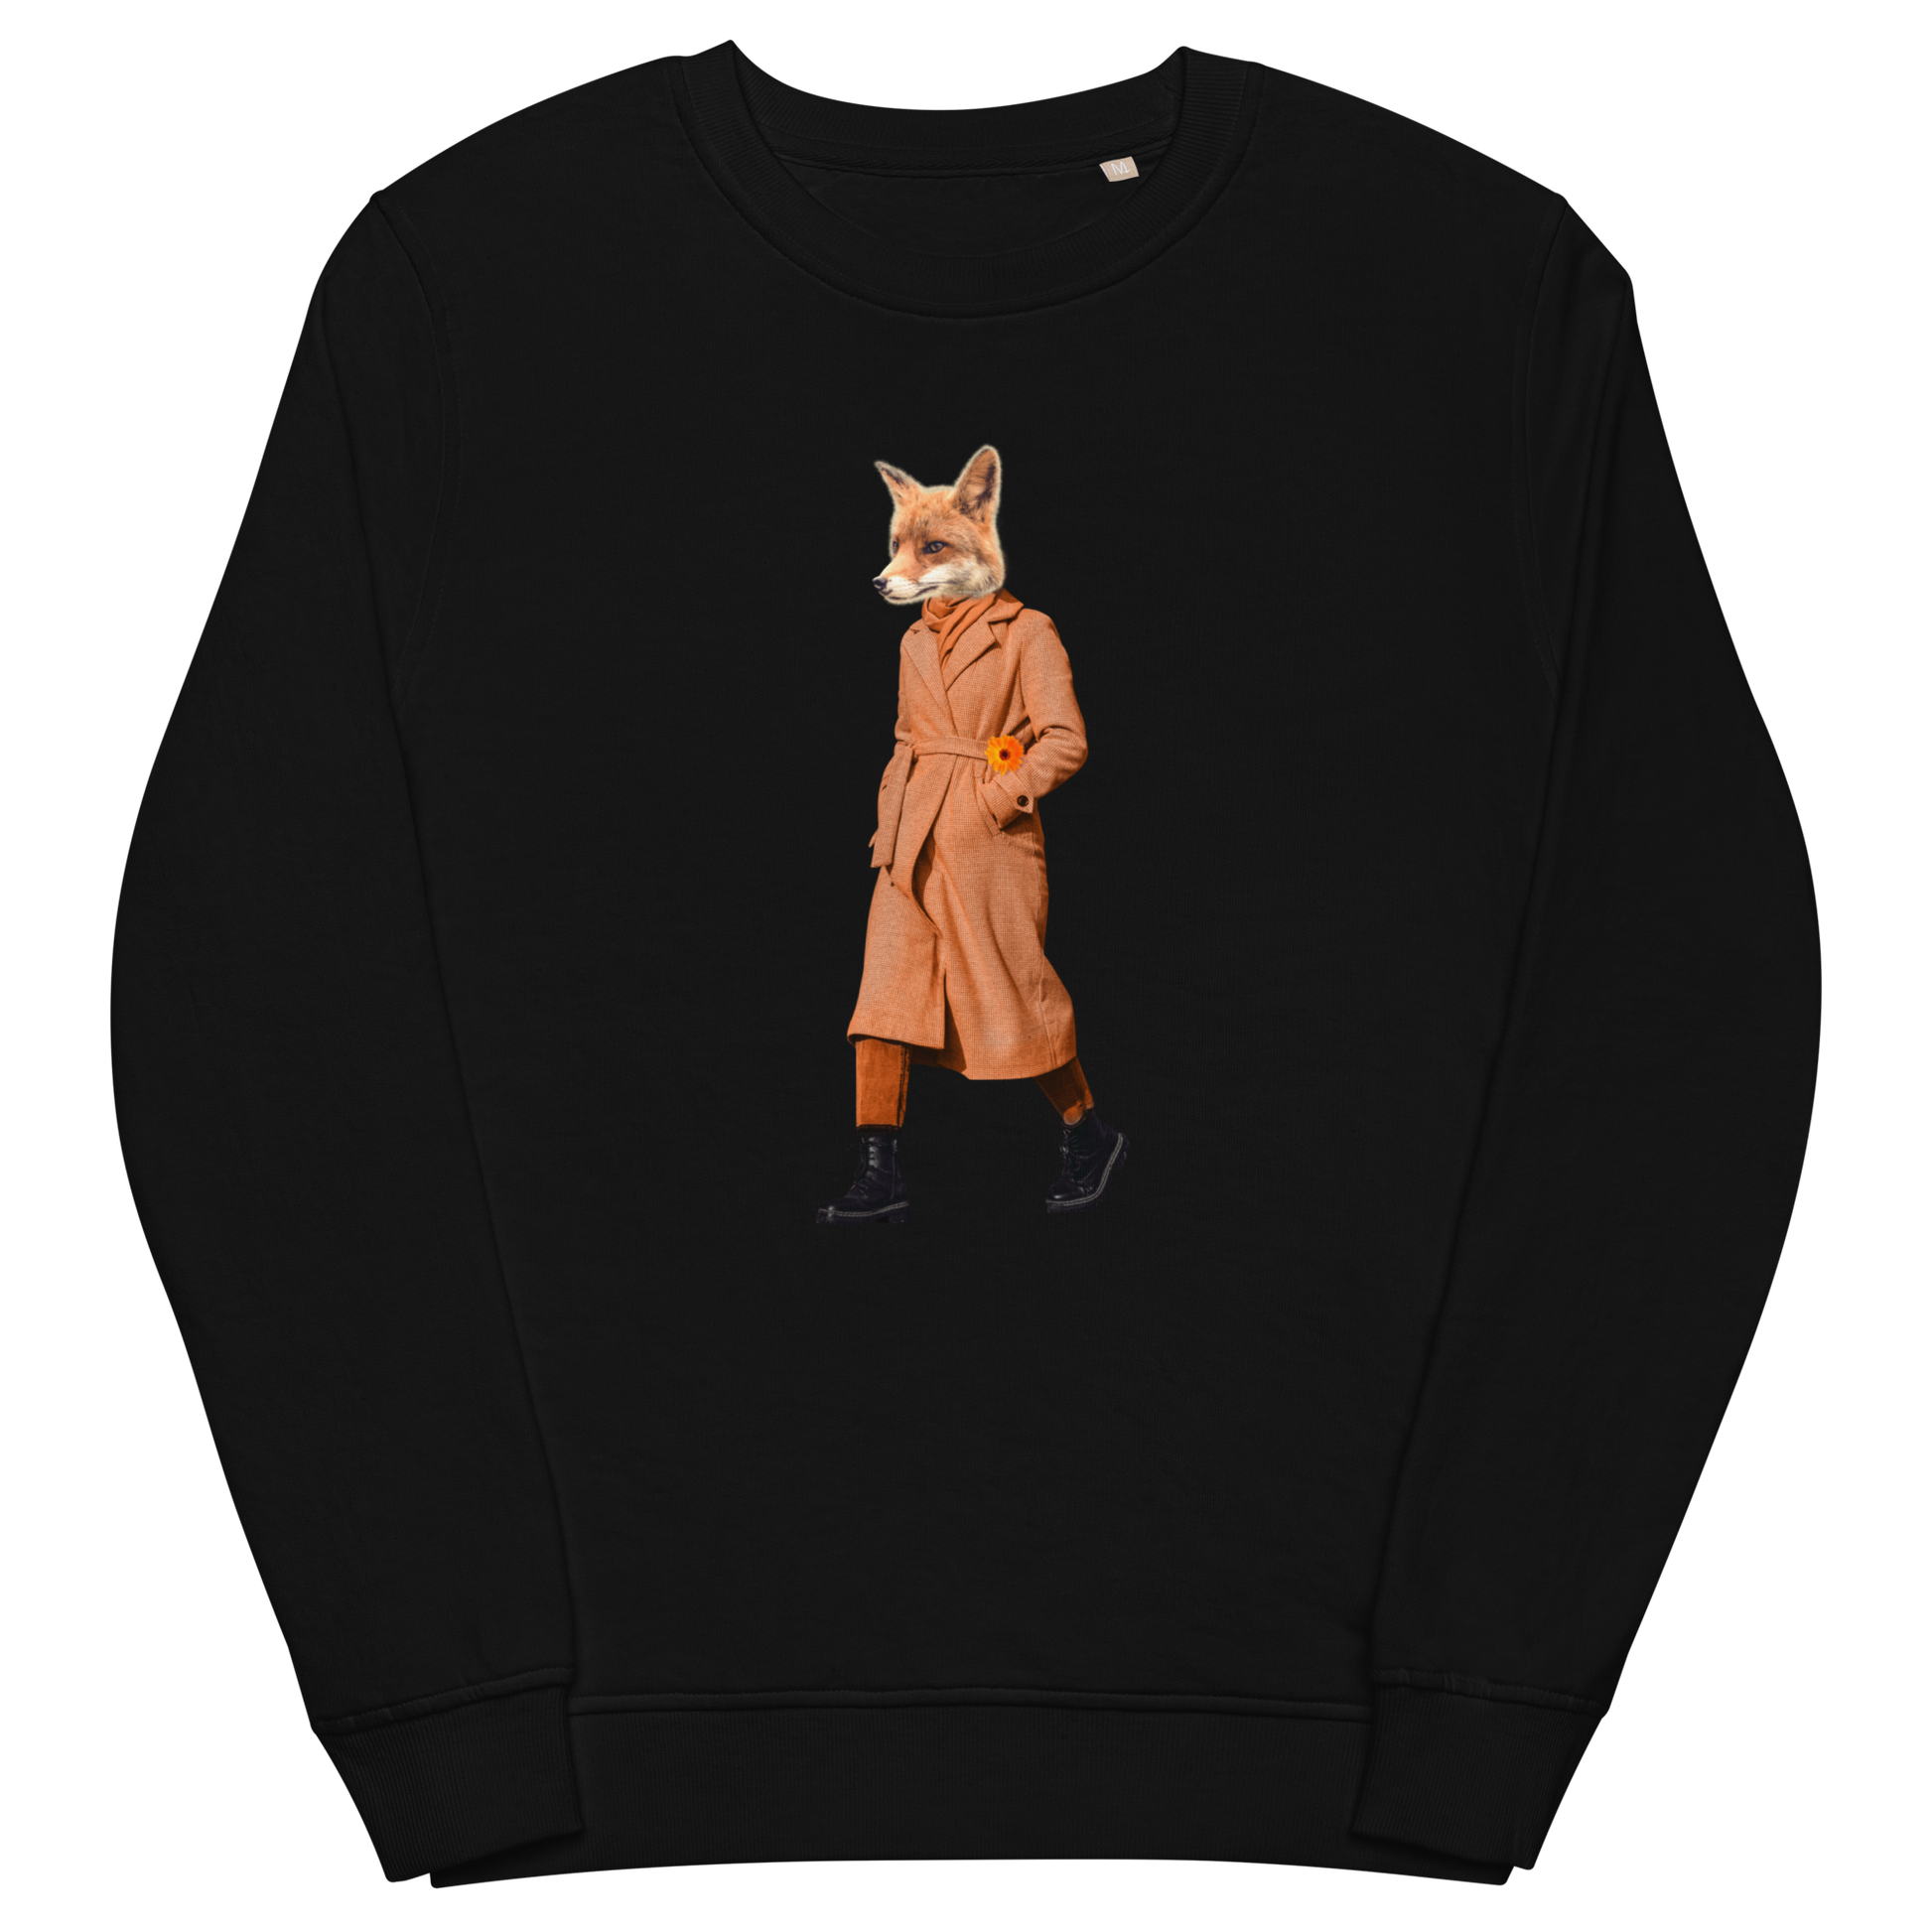 Black Organic Cotton Anthropomorphic Fox Sweatshirt showcasing a sly Anthropomorphic Fox In a Trench Coat graphic on the chest - Cool Anthropomorphic Fox Graphic Sweatshirts - Boozy Fox